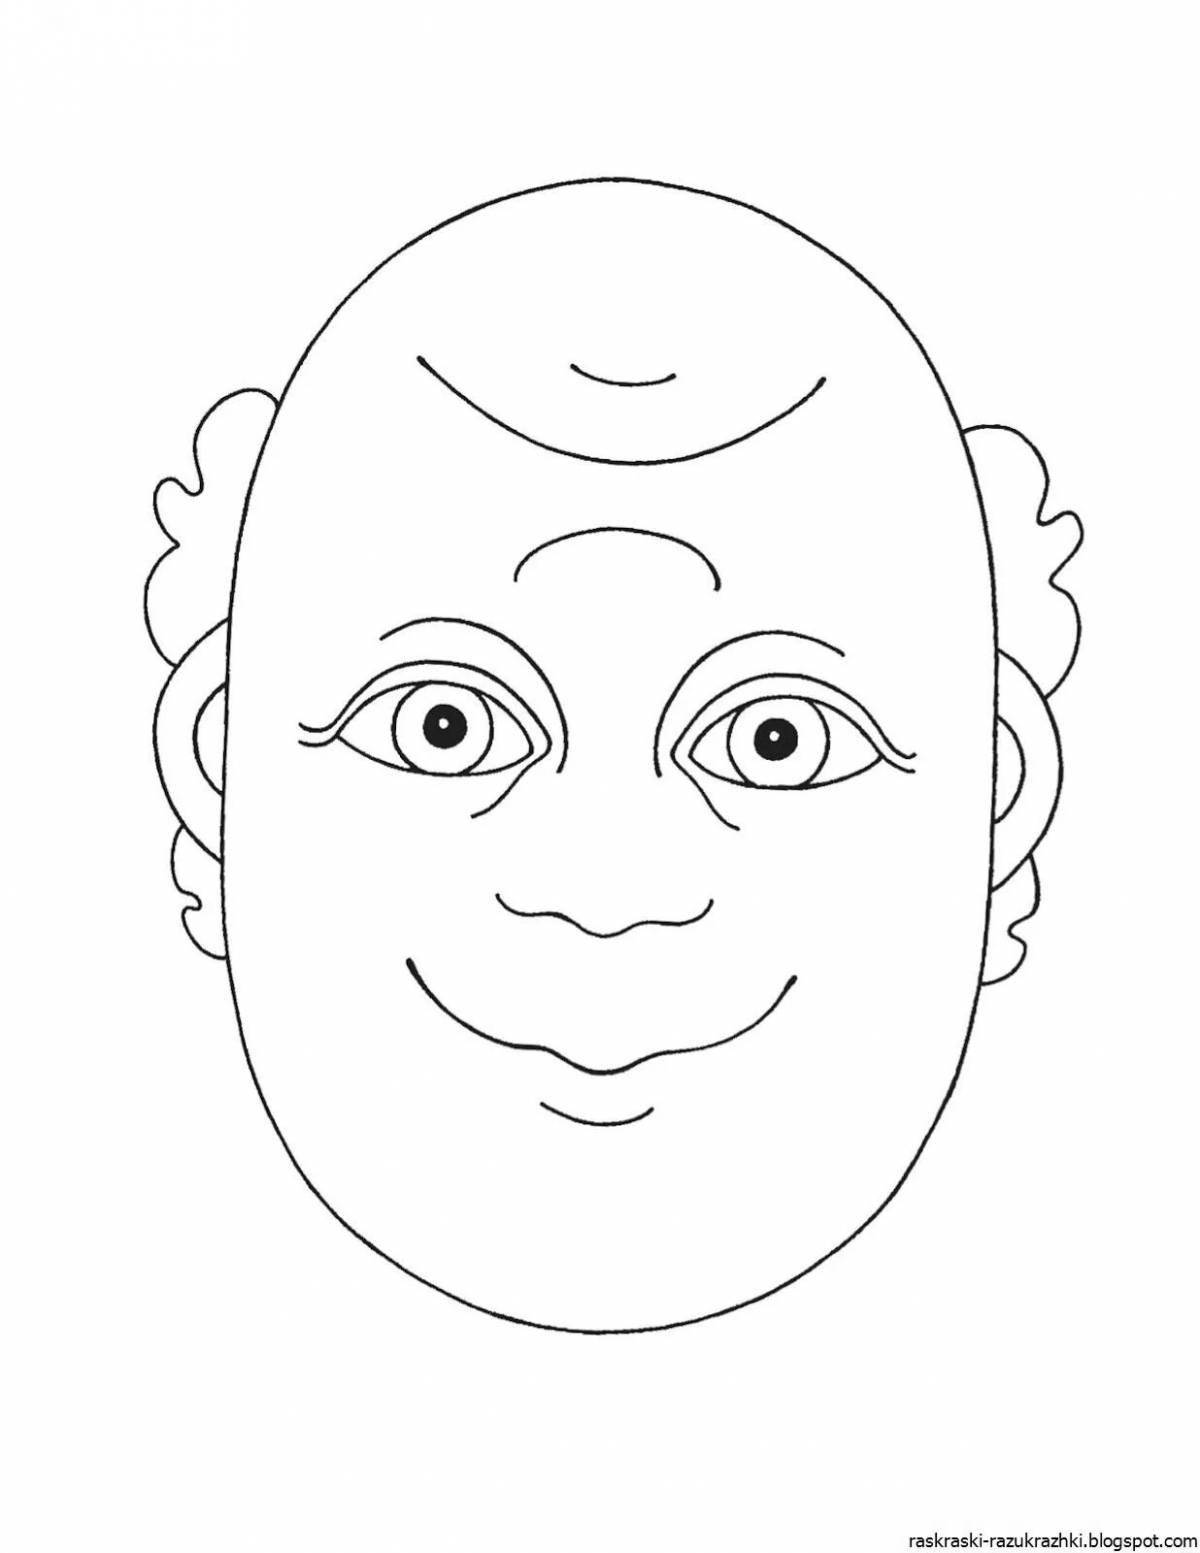 Delightful drawing of a human face